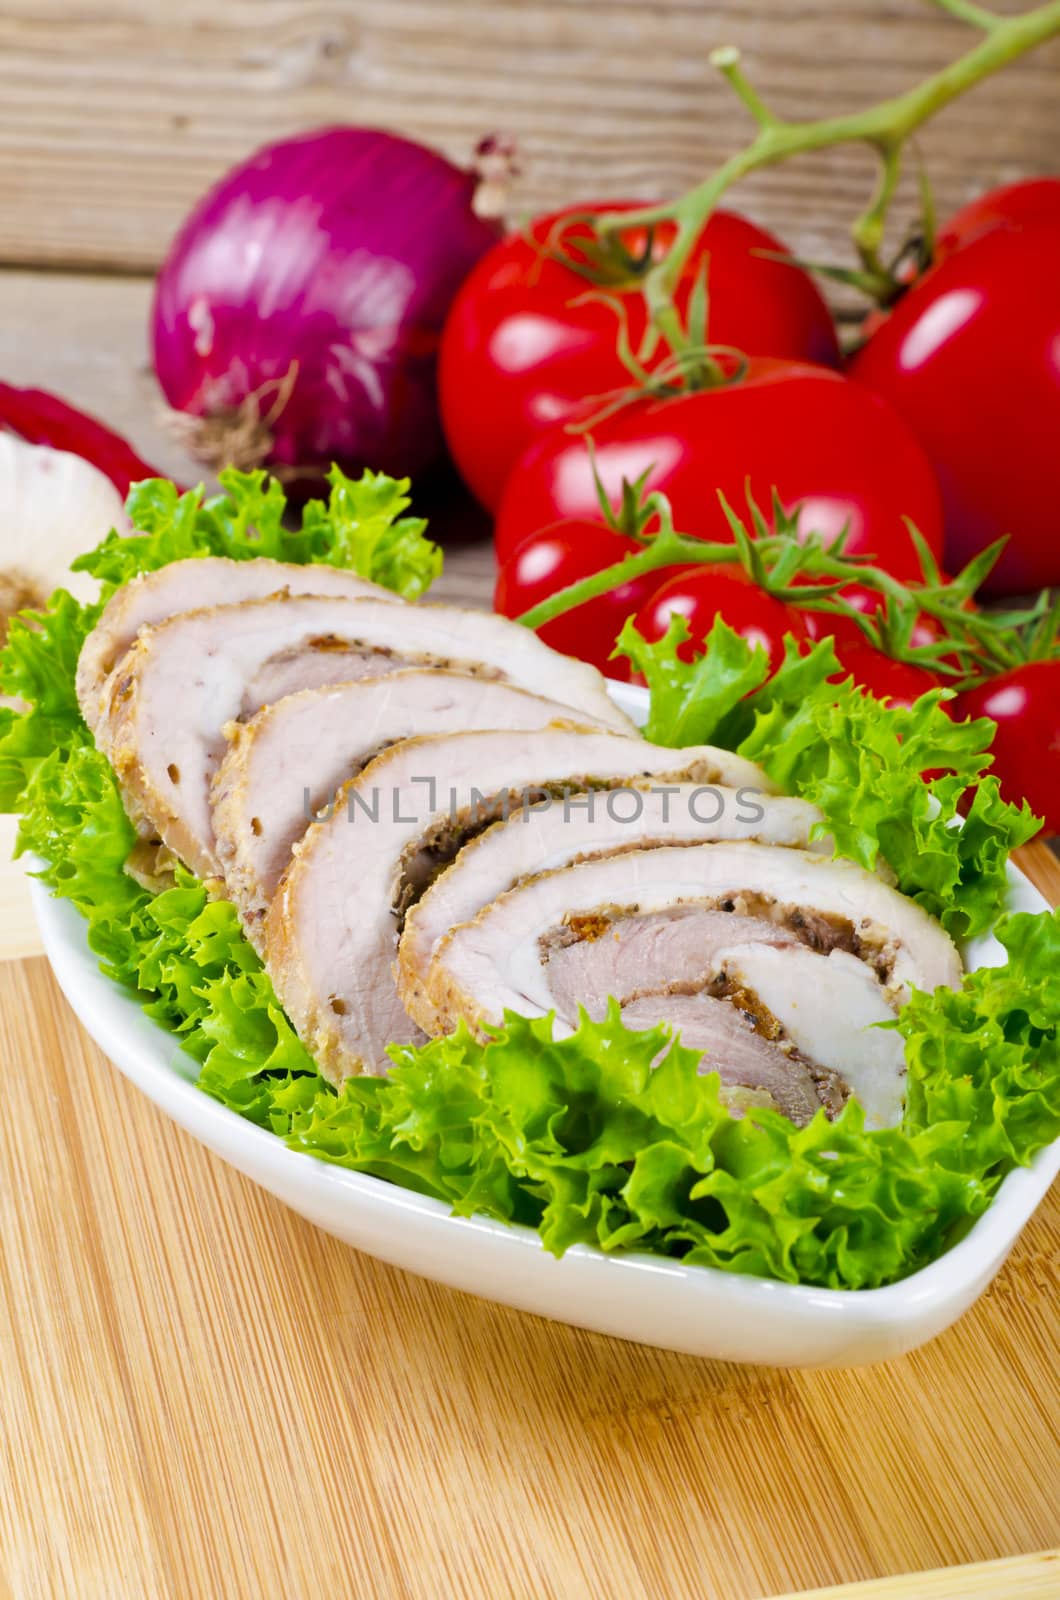 In a classic meat roulade, meat is tenderized before being rolled around a filling made from vegetables, breadcrumbs, and sometimes other meats or seafood. 